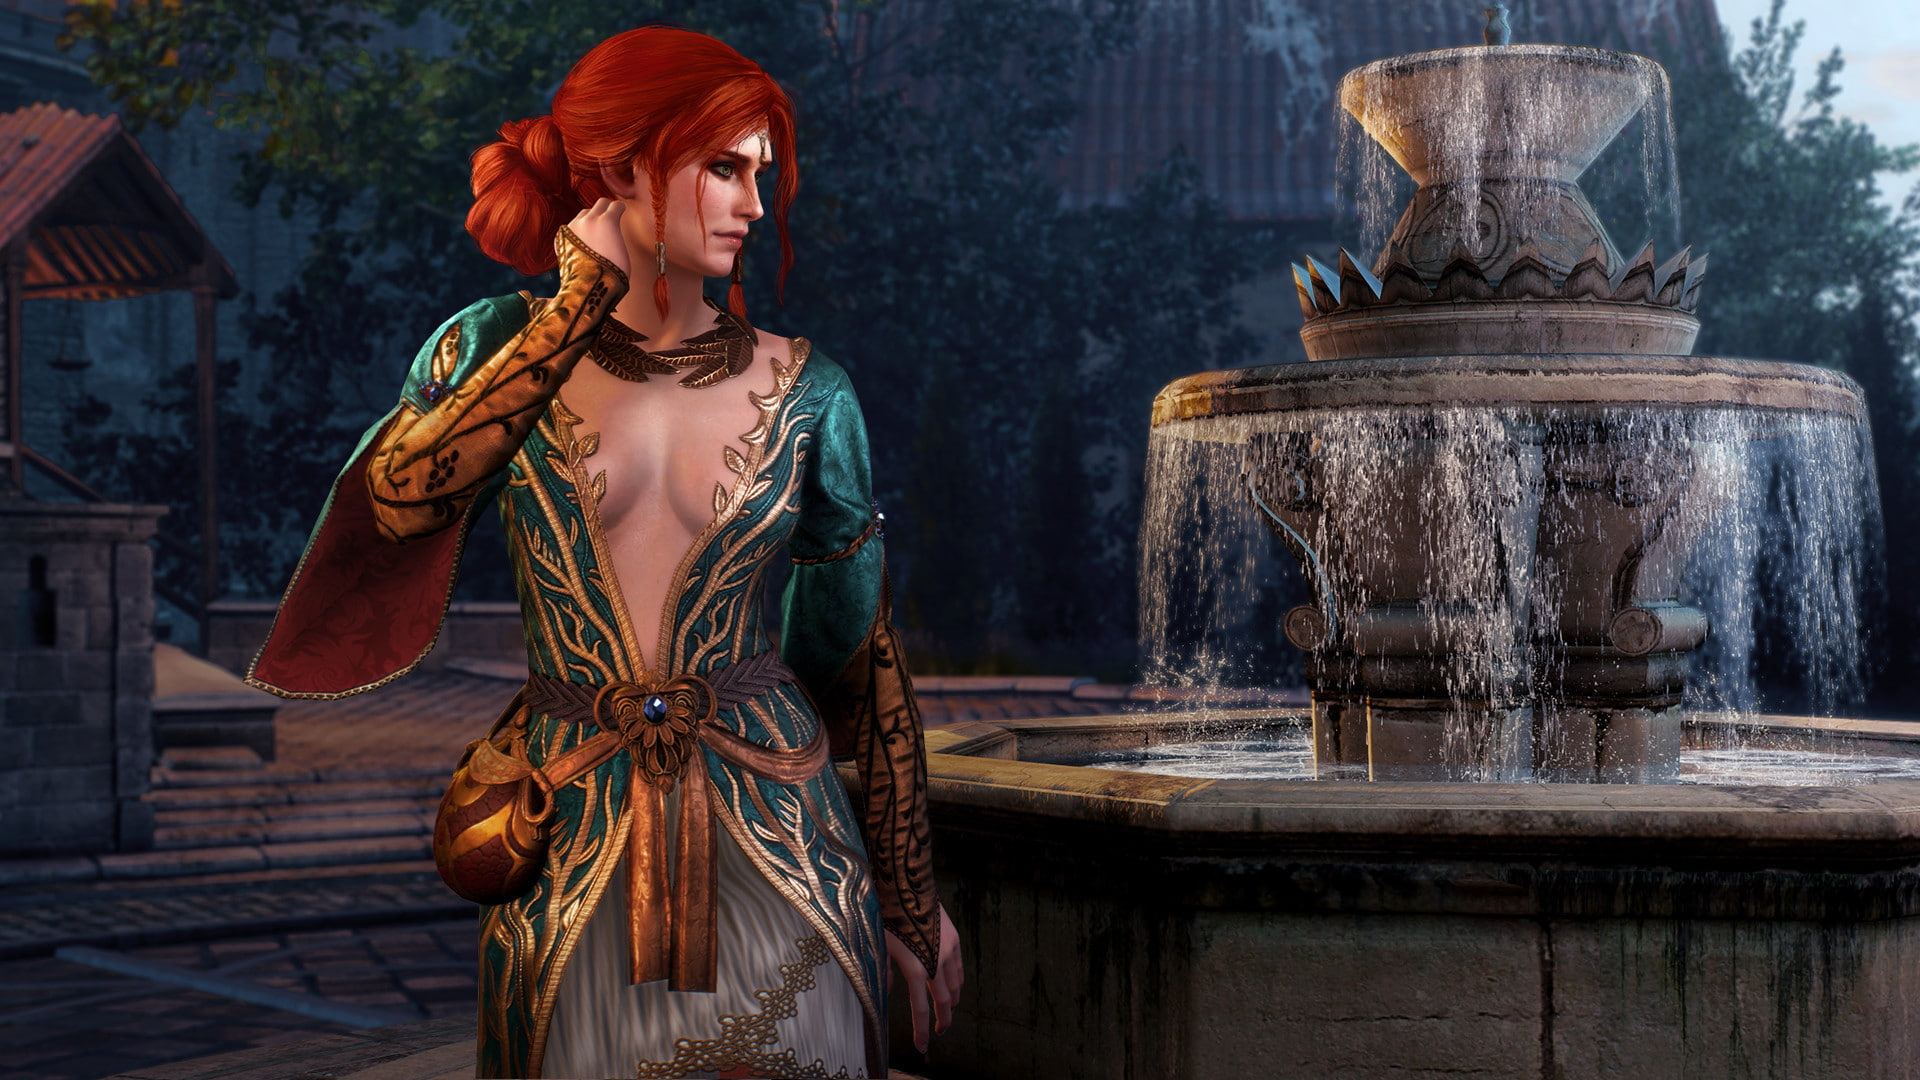 game-clothing-outfit-fountain-wallpaper-